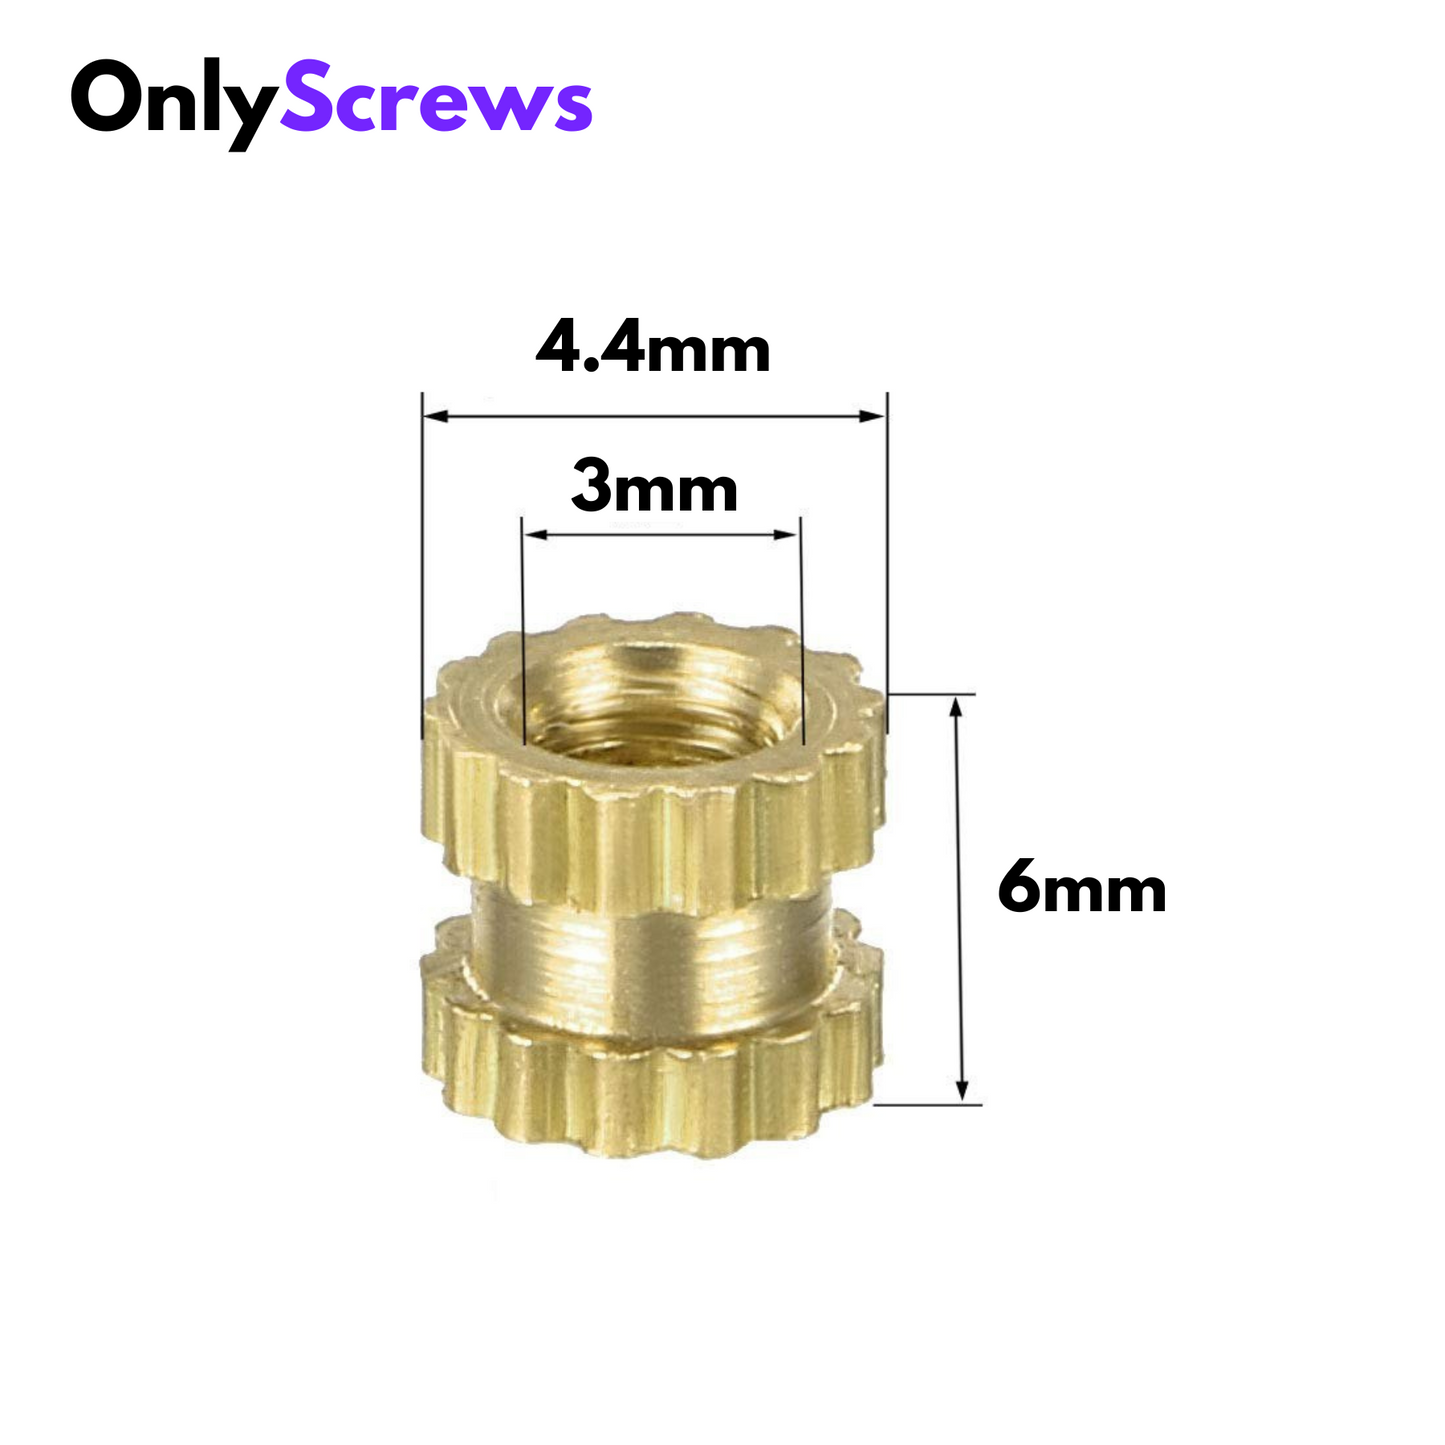 M3 X 6mm Brass threaded inserts with dimensions